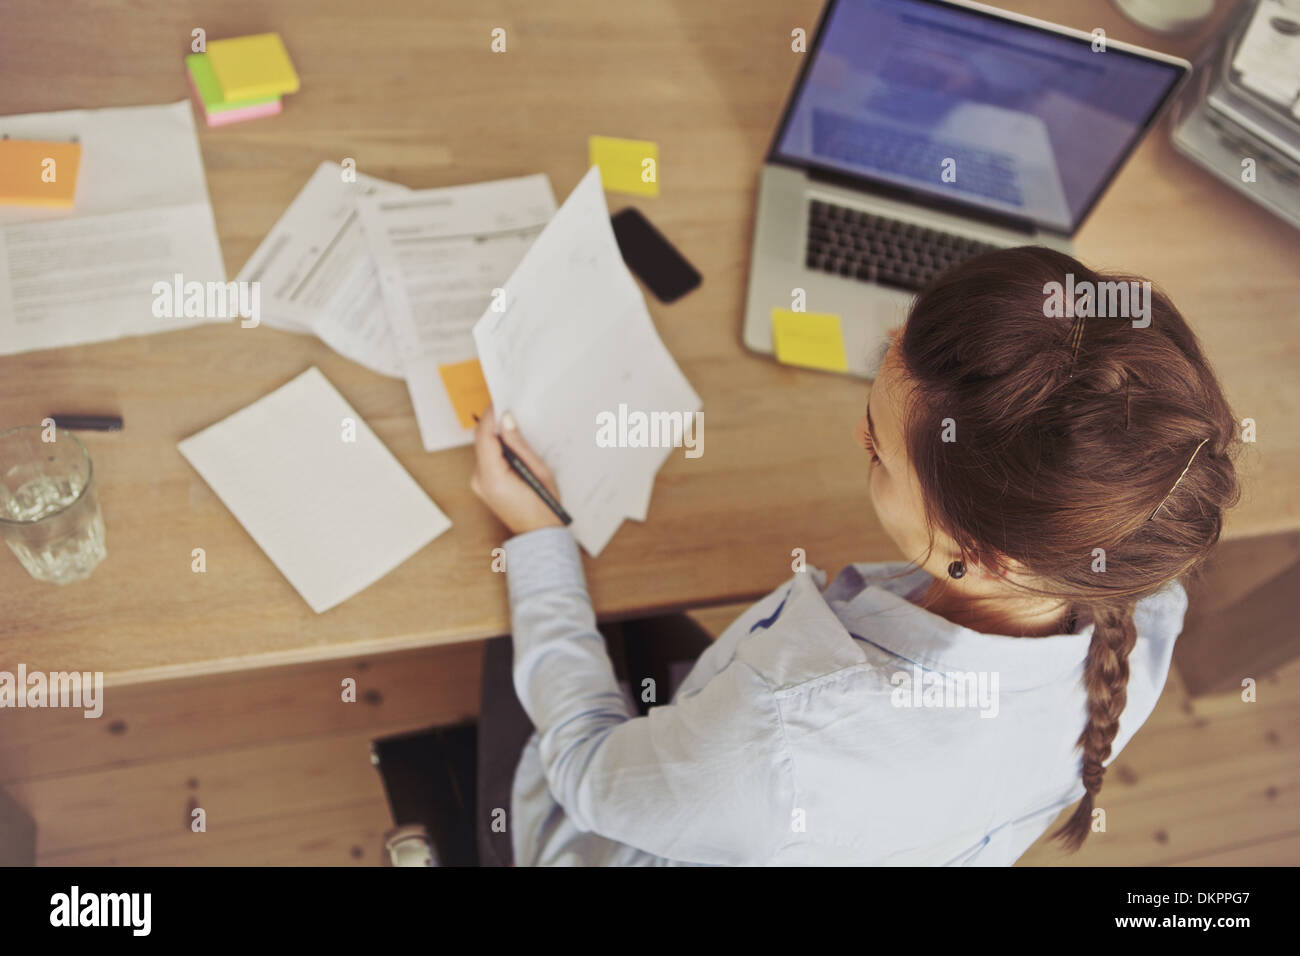 Top view of young woman checking bills while sitting at the desk with laptop. Caucasian businesswoman working at the desk. Stock Photo